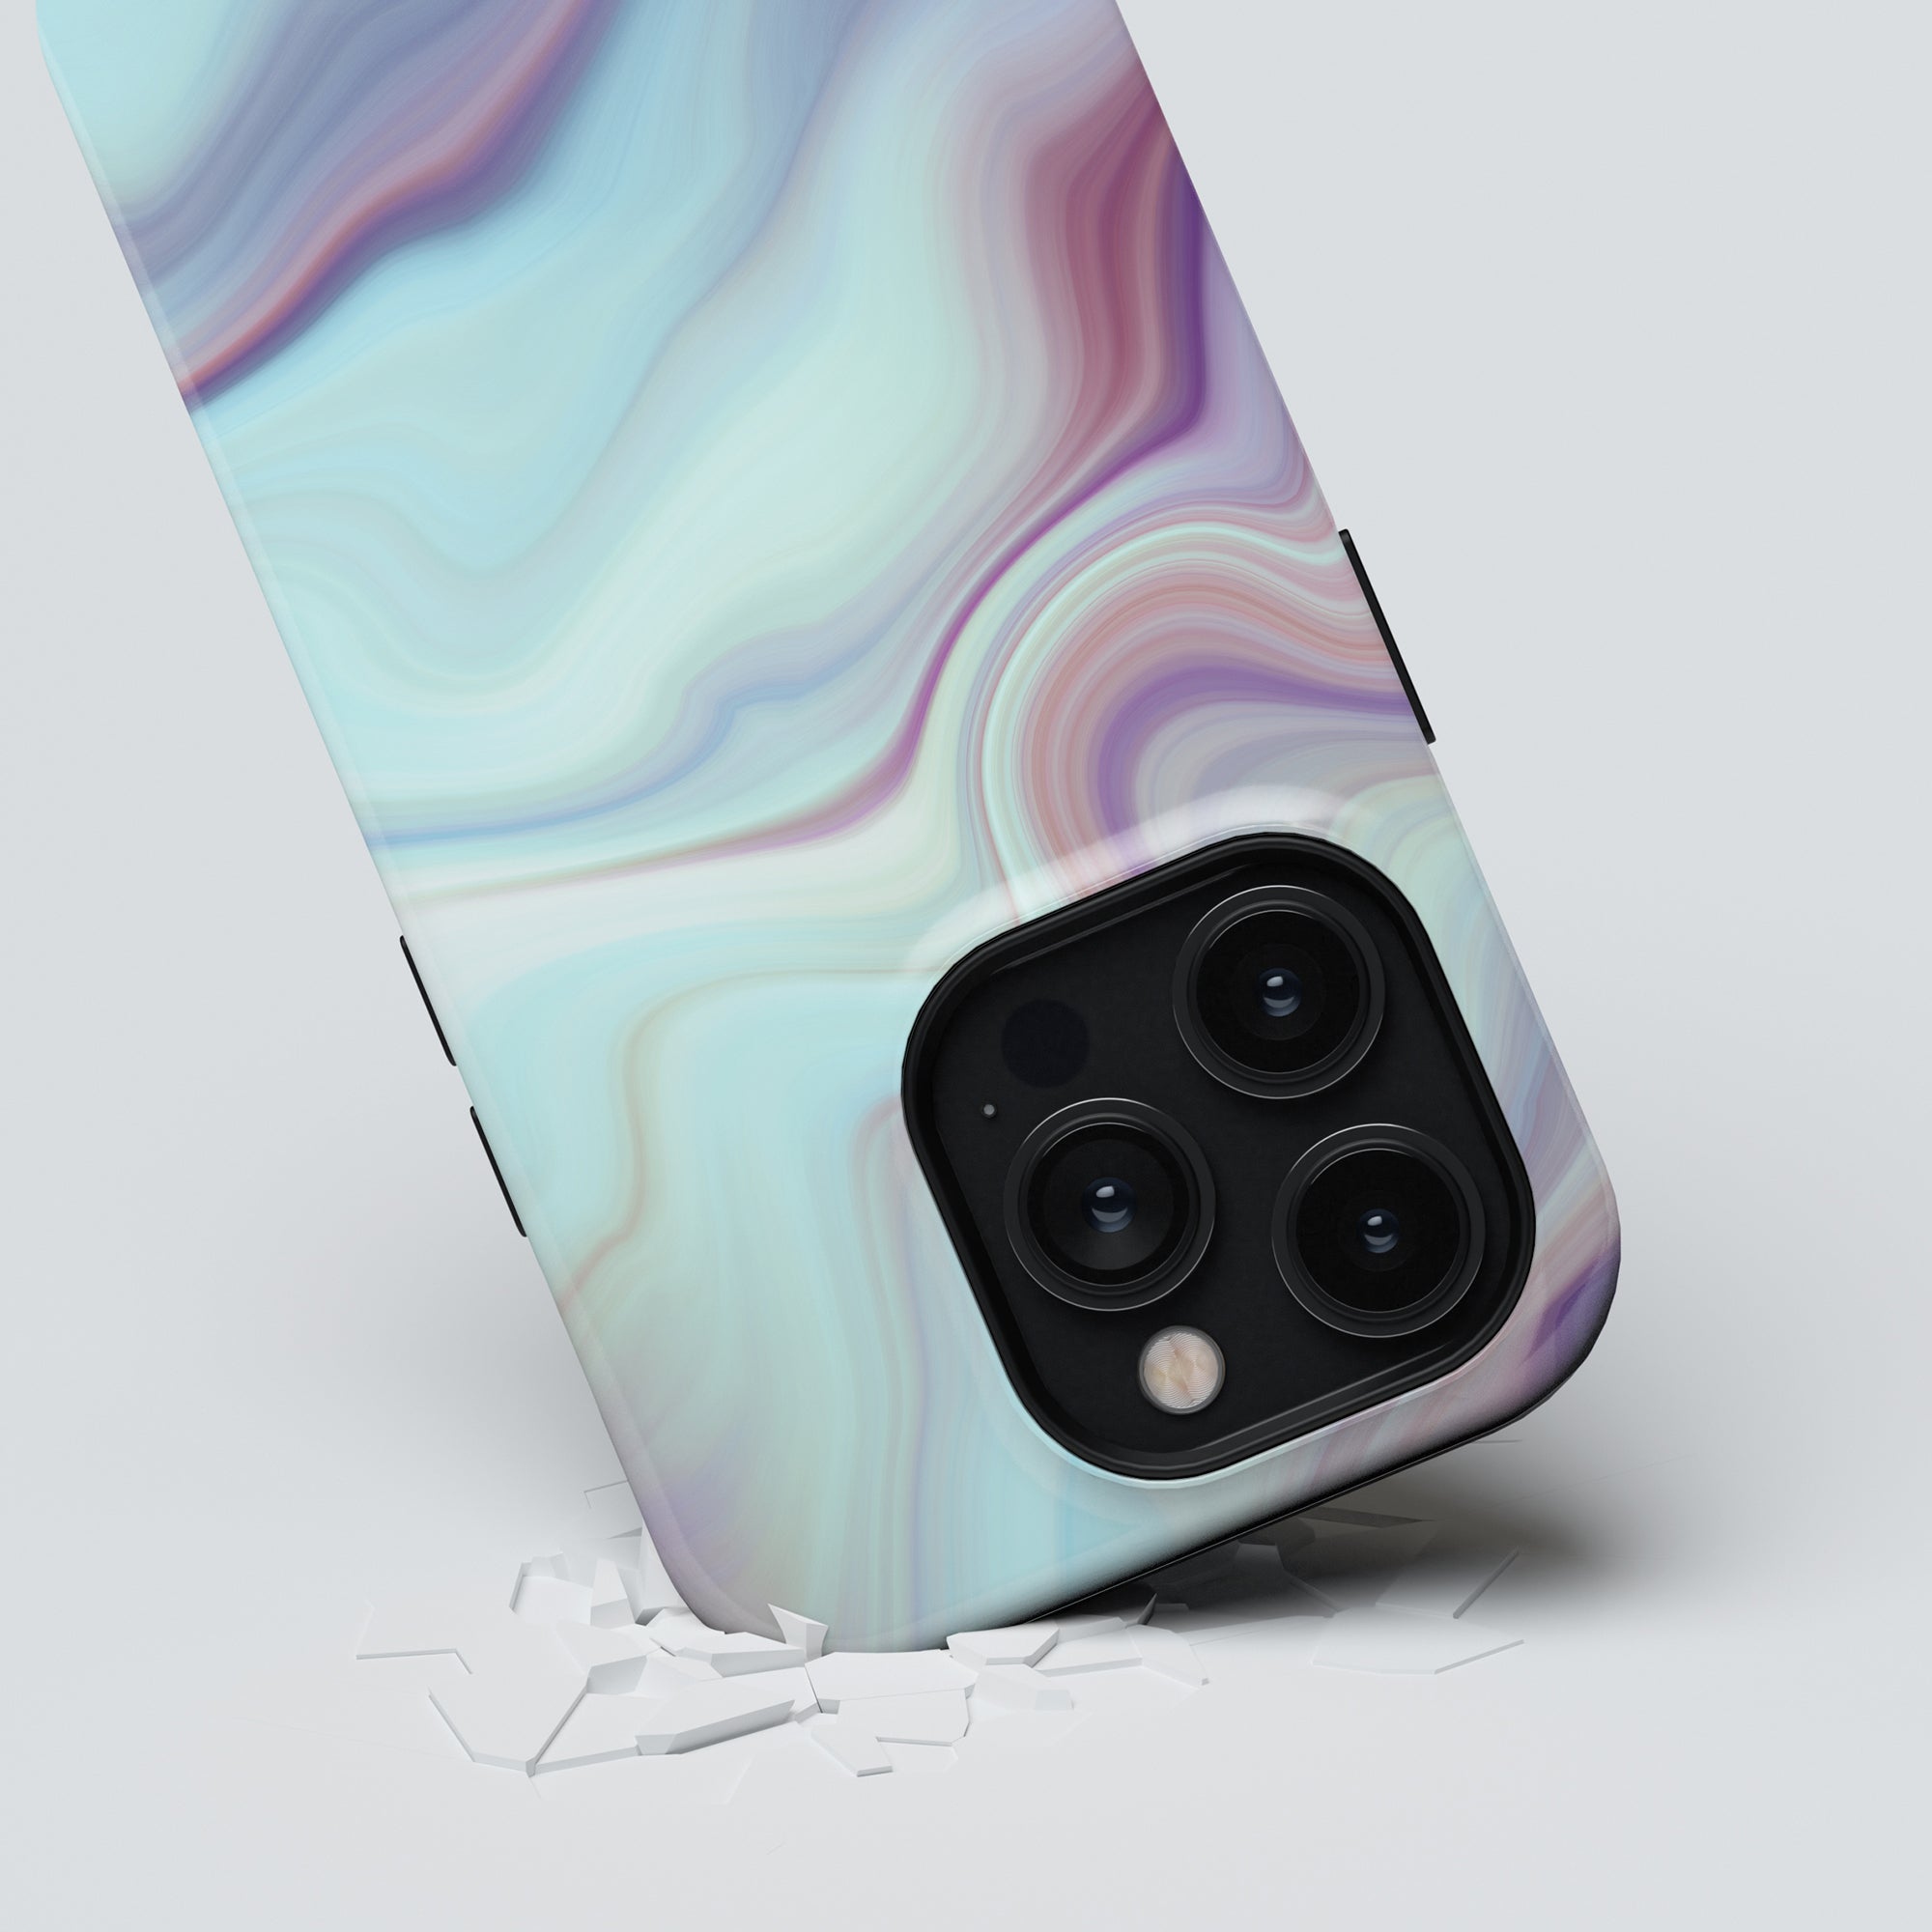 Close-up of a smartphone with a triple camera system, breaking through a white surface. The phone's case features an Abalone - Tough Case design from the Oyster Collection.